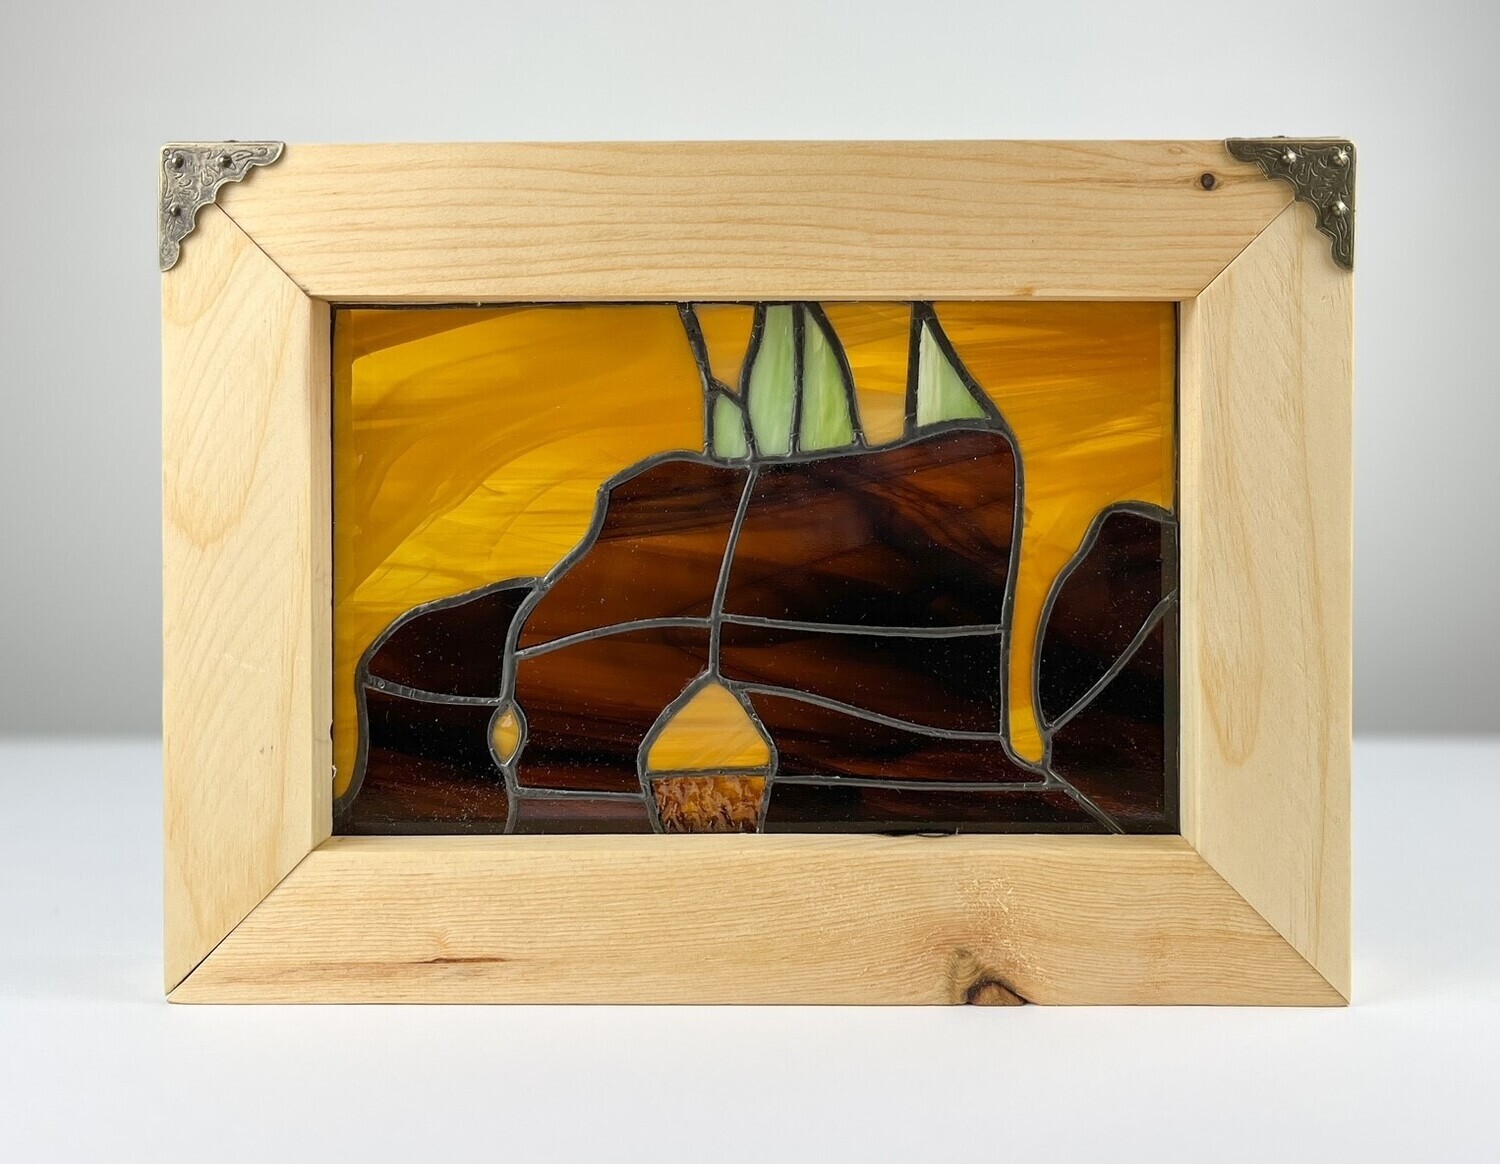 "Hopewell Rocks 6" 8x12" Framed Stained Glass